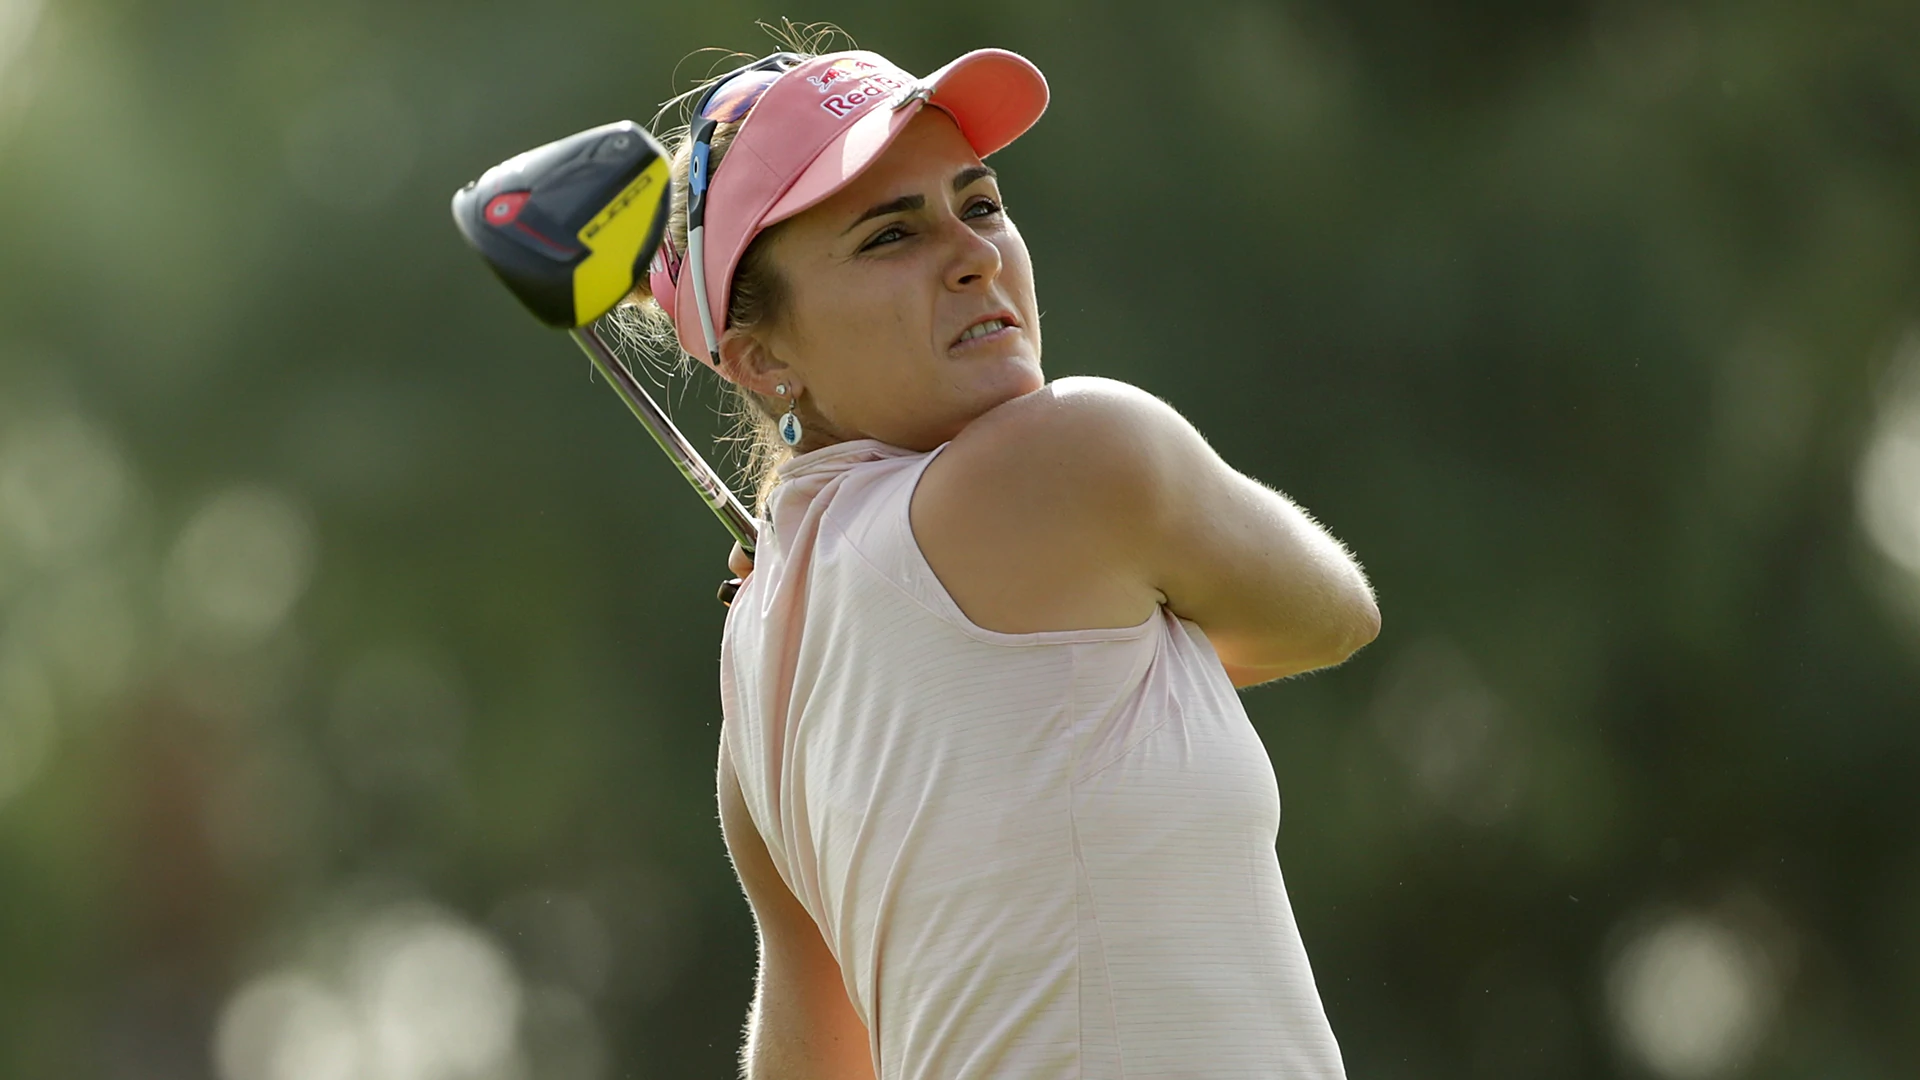 New putting grip among changes for Lexi Thompson (70) at ANA 2